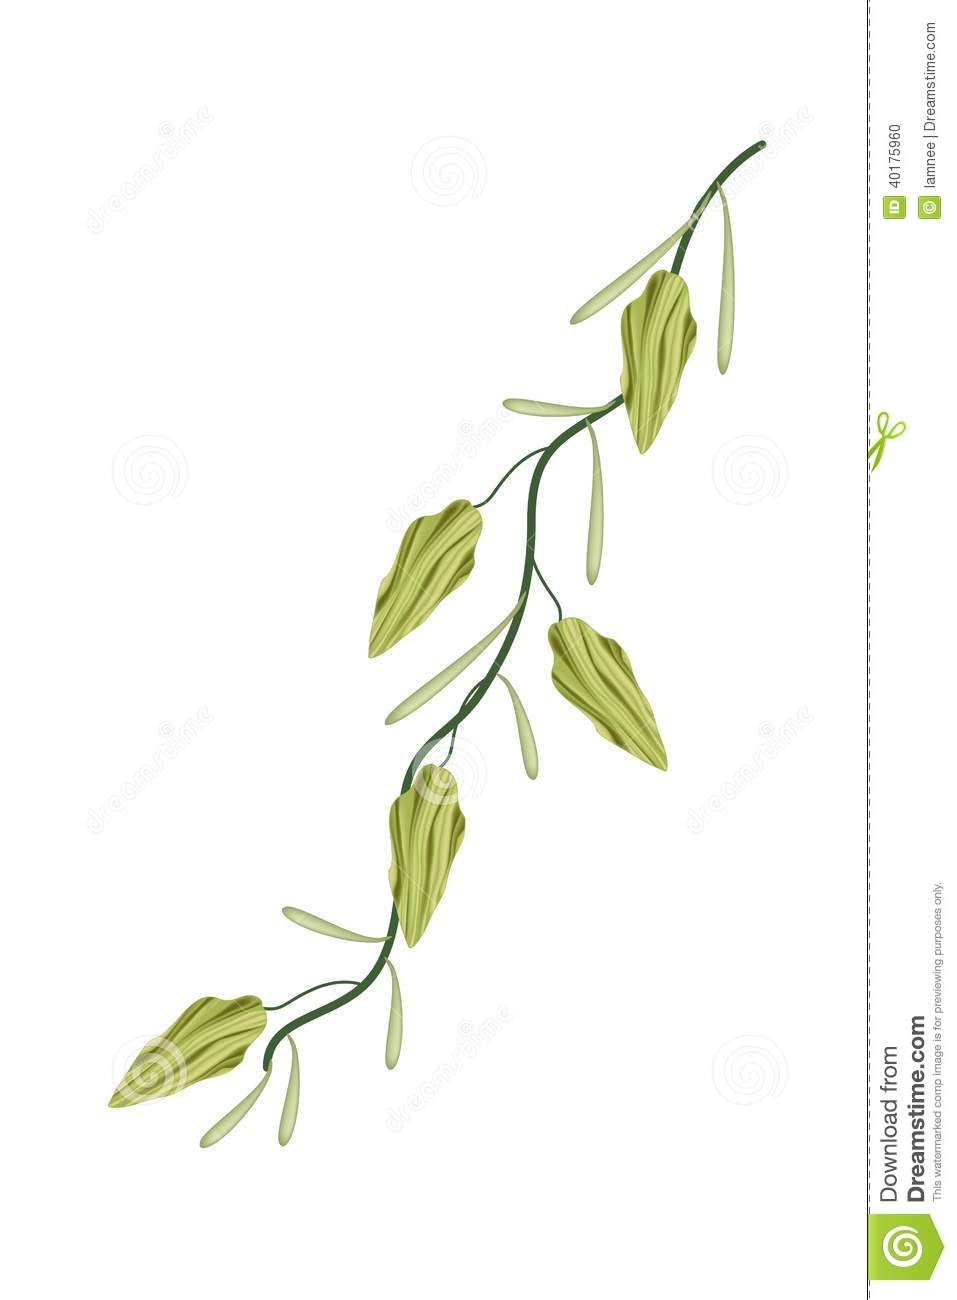 Vegetable And Herb An Illustration Of Fresh Green Cardamom Pods On A